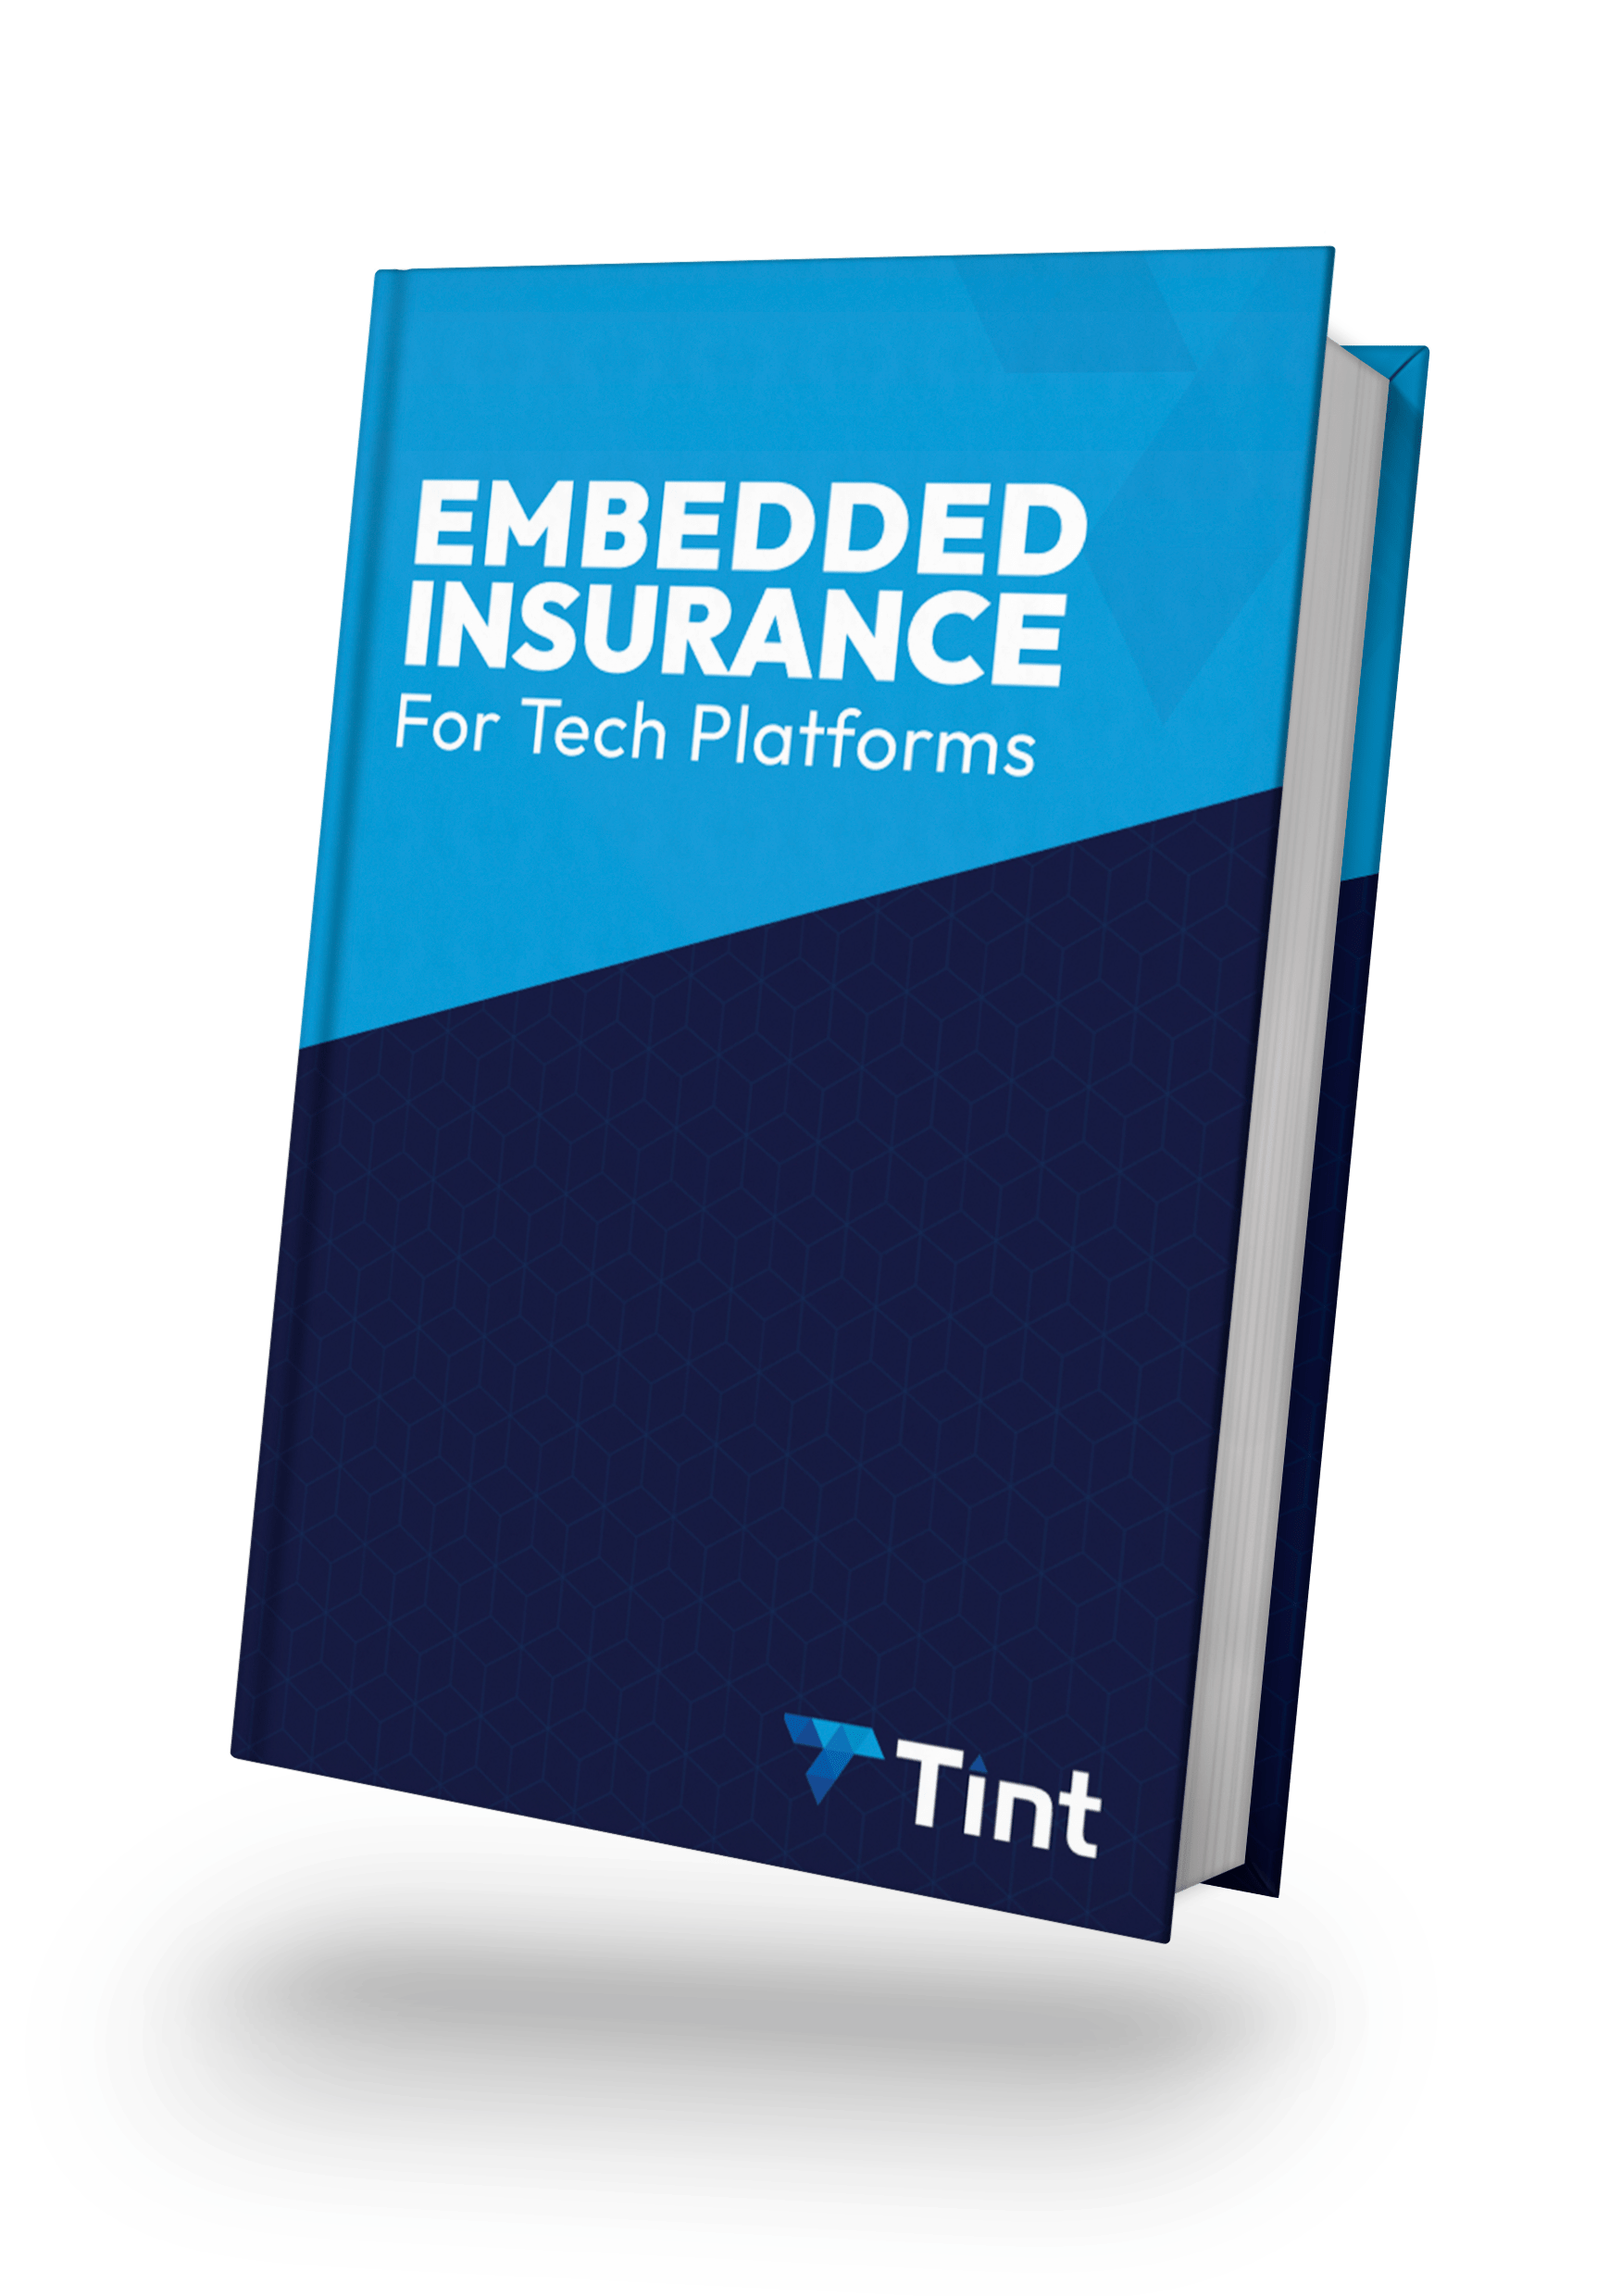 What embedded insurance and embedded protection are with examples